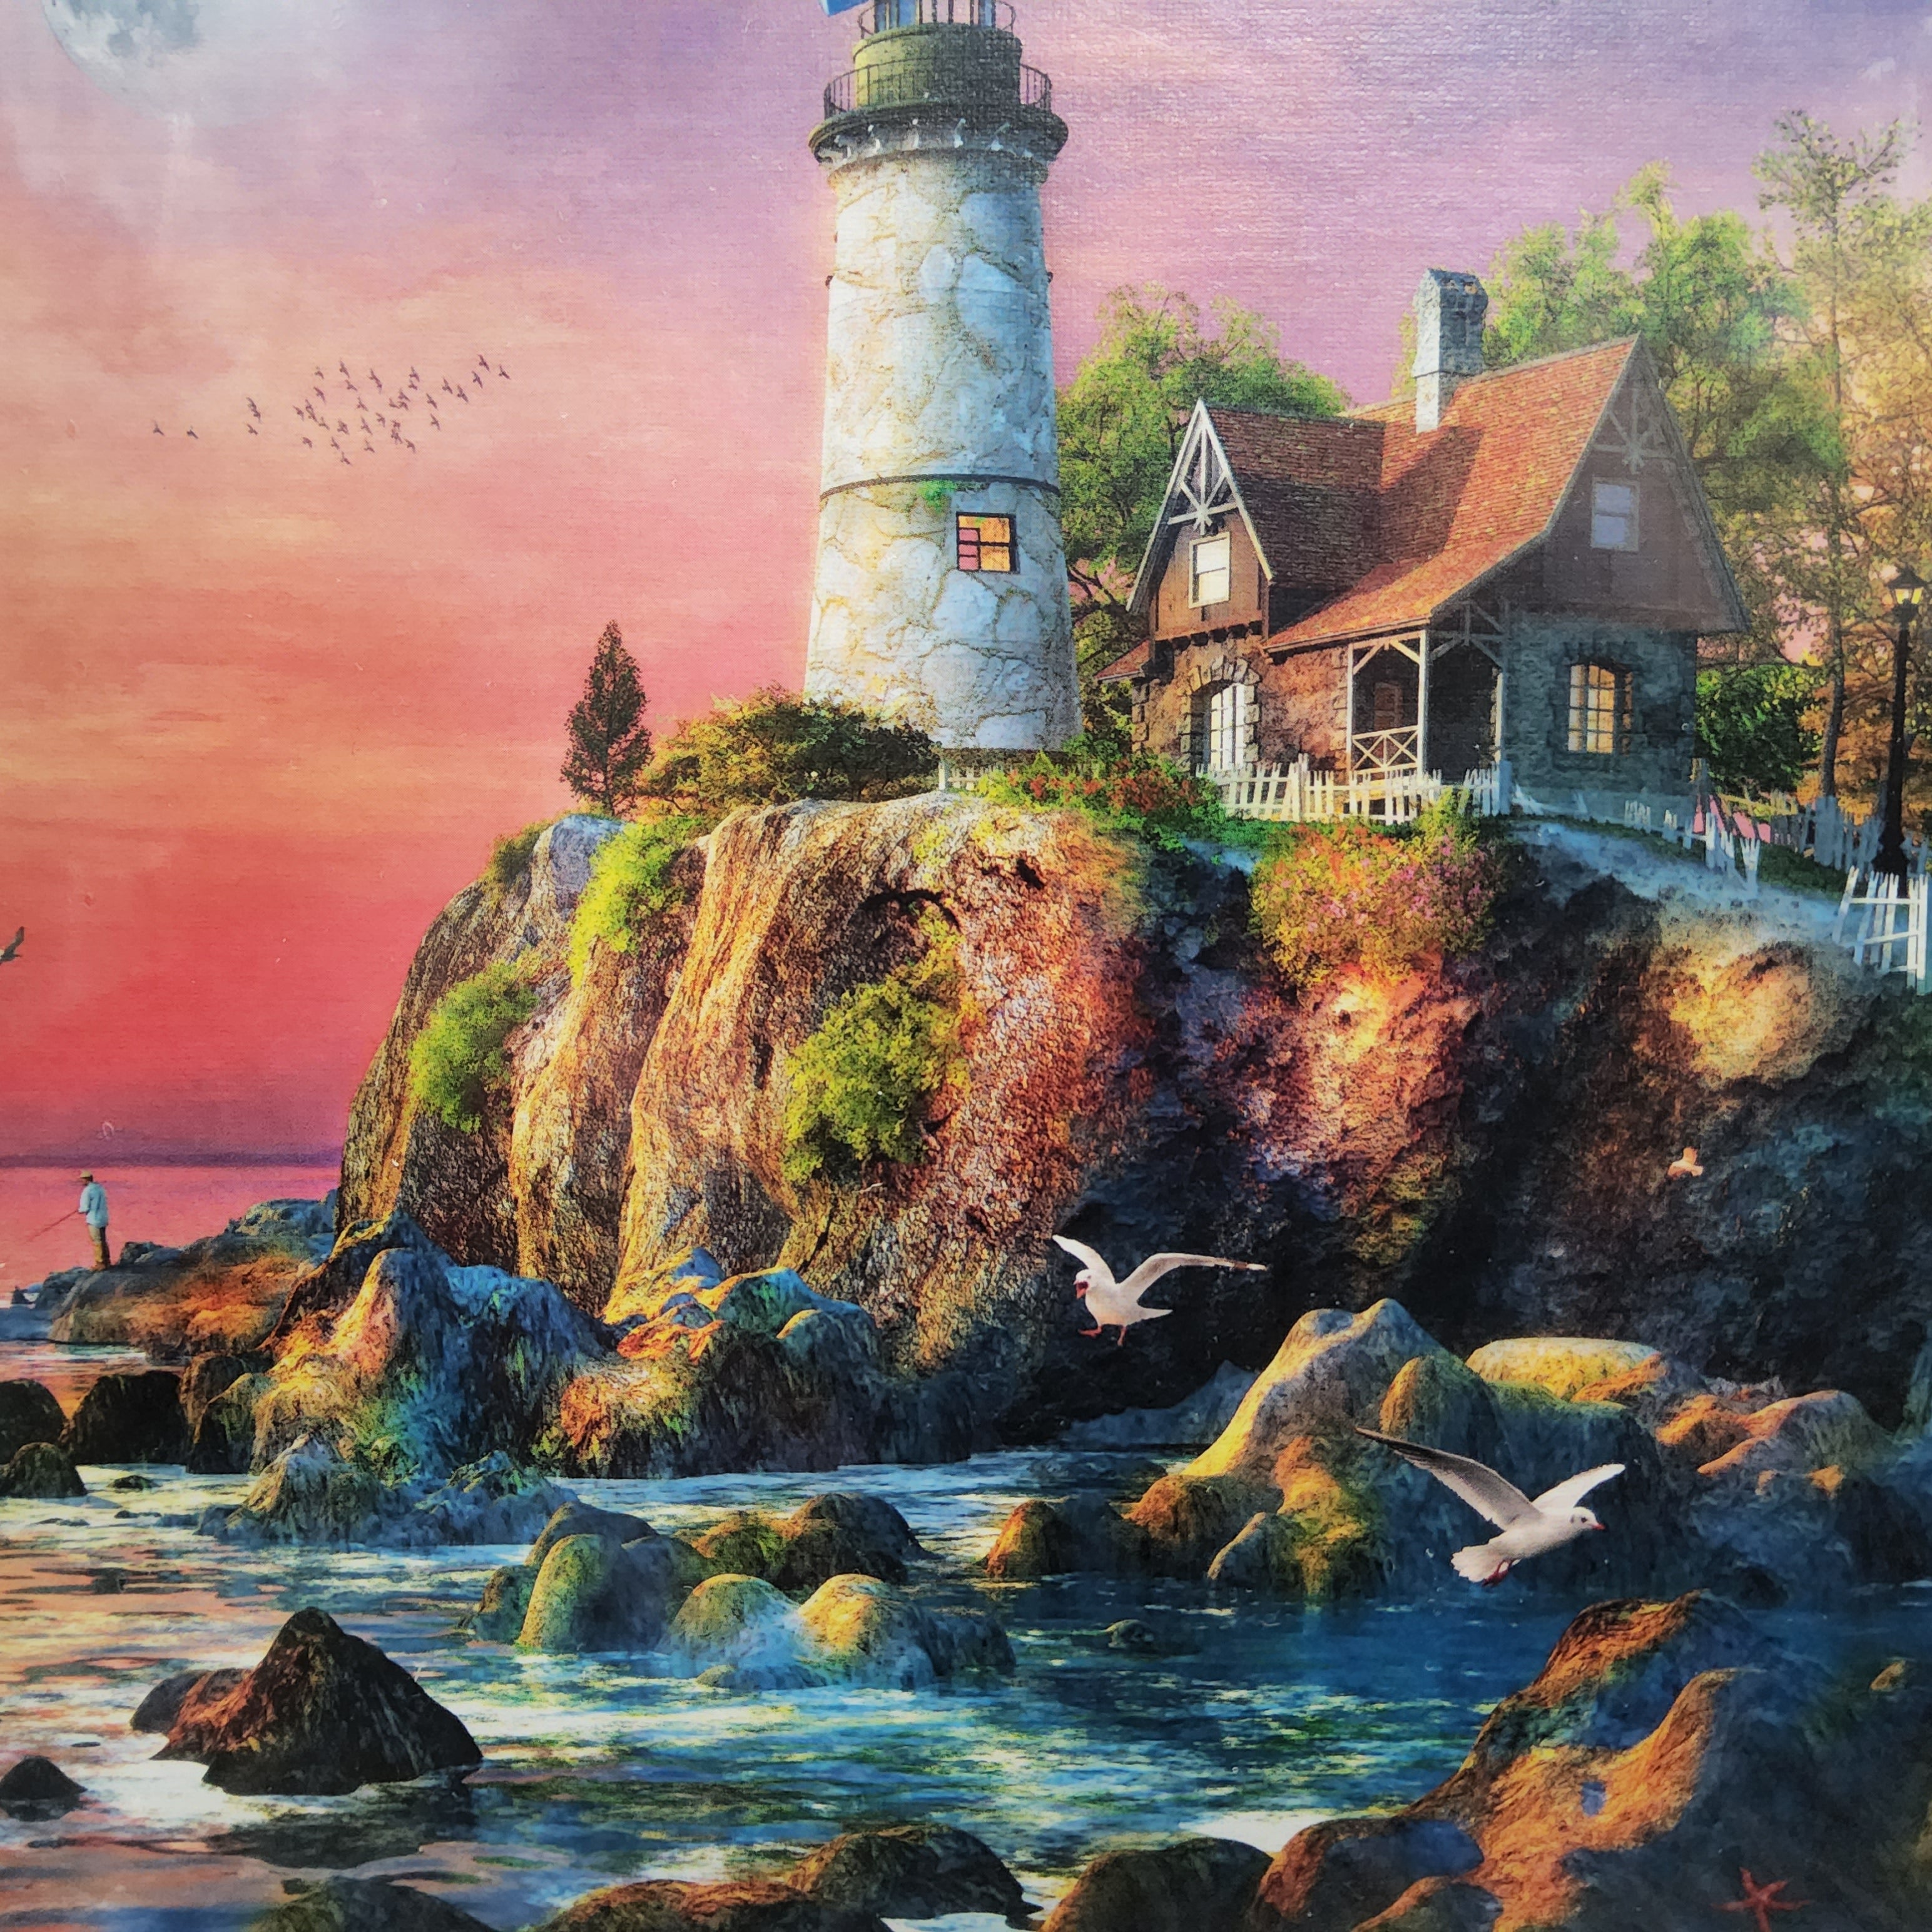 Ravensburger Puzzle - Lighthouse at Sunset - 500 pieces - #16581